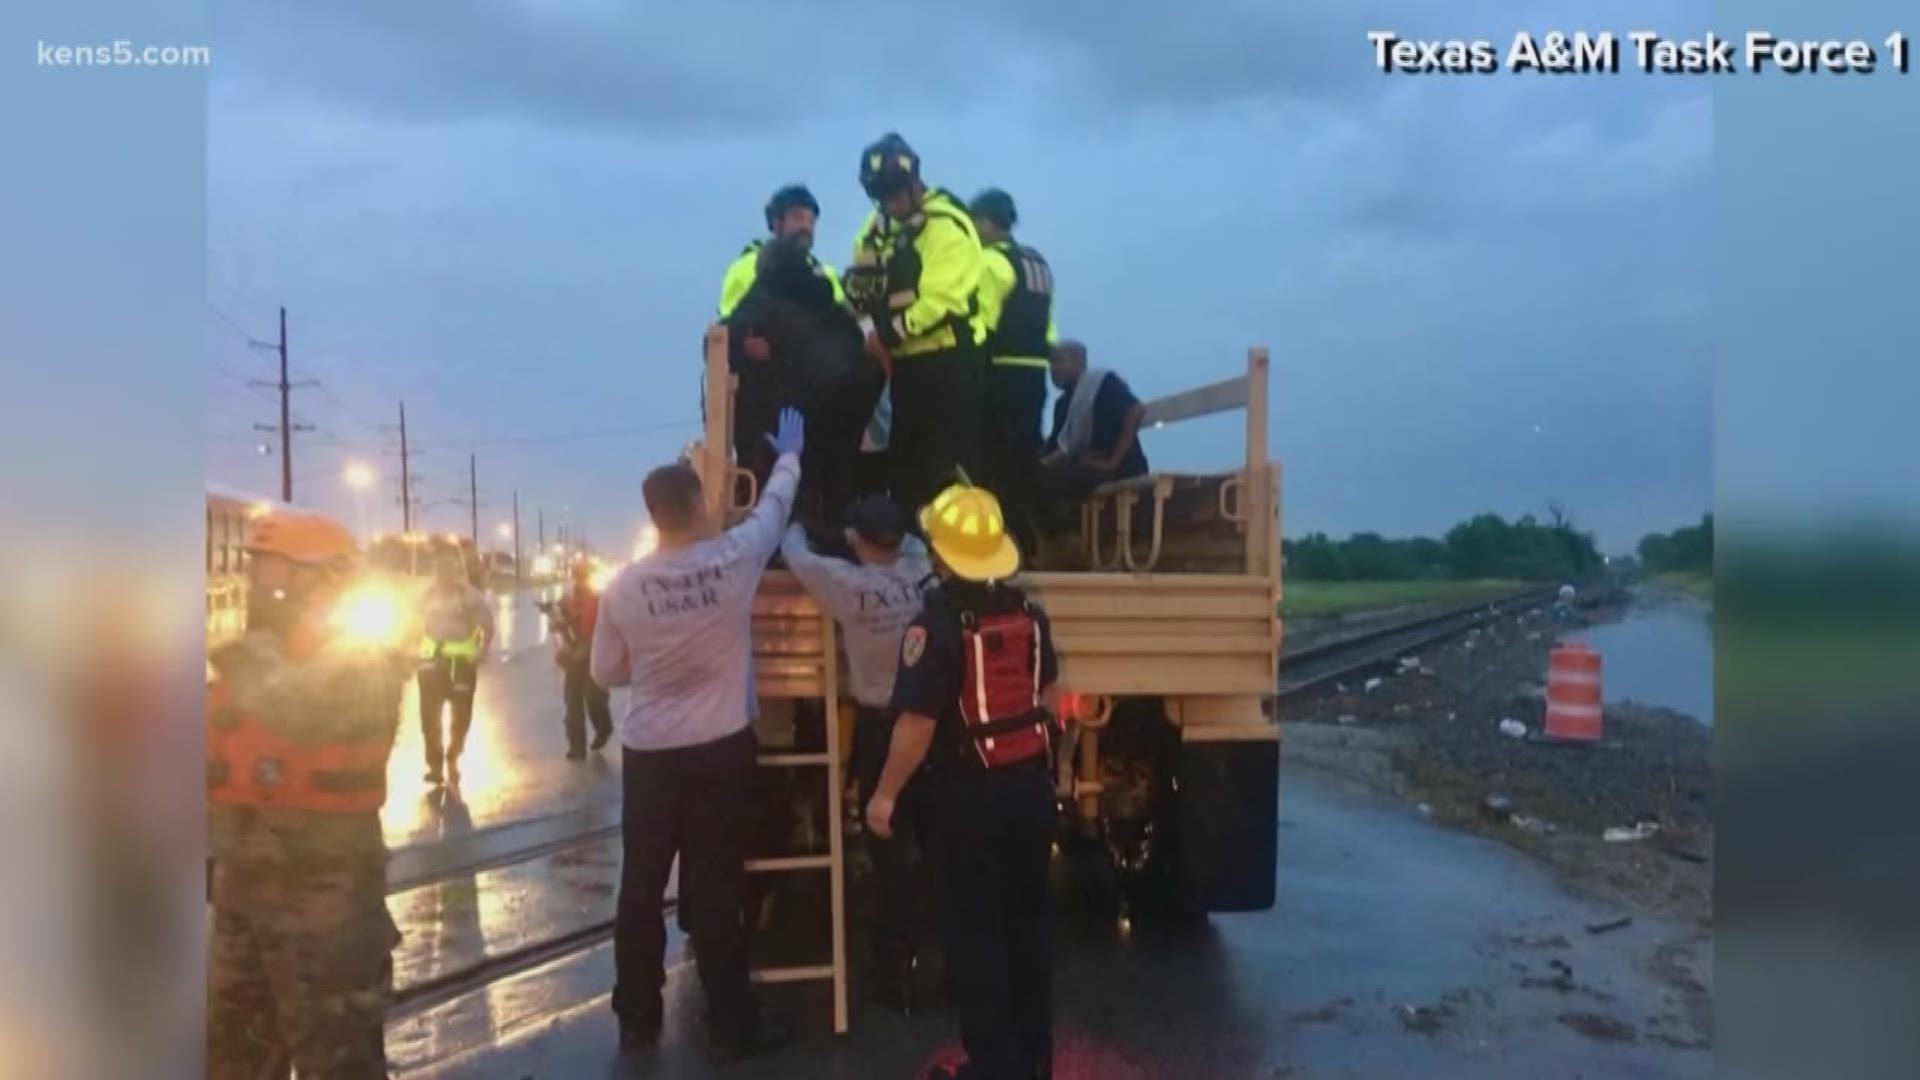 Several local first responders are specially trained to help in times of disaster. This San Antonio First Responder reflects on rescue missions during Imelda.